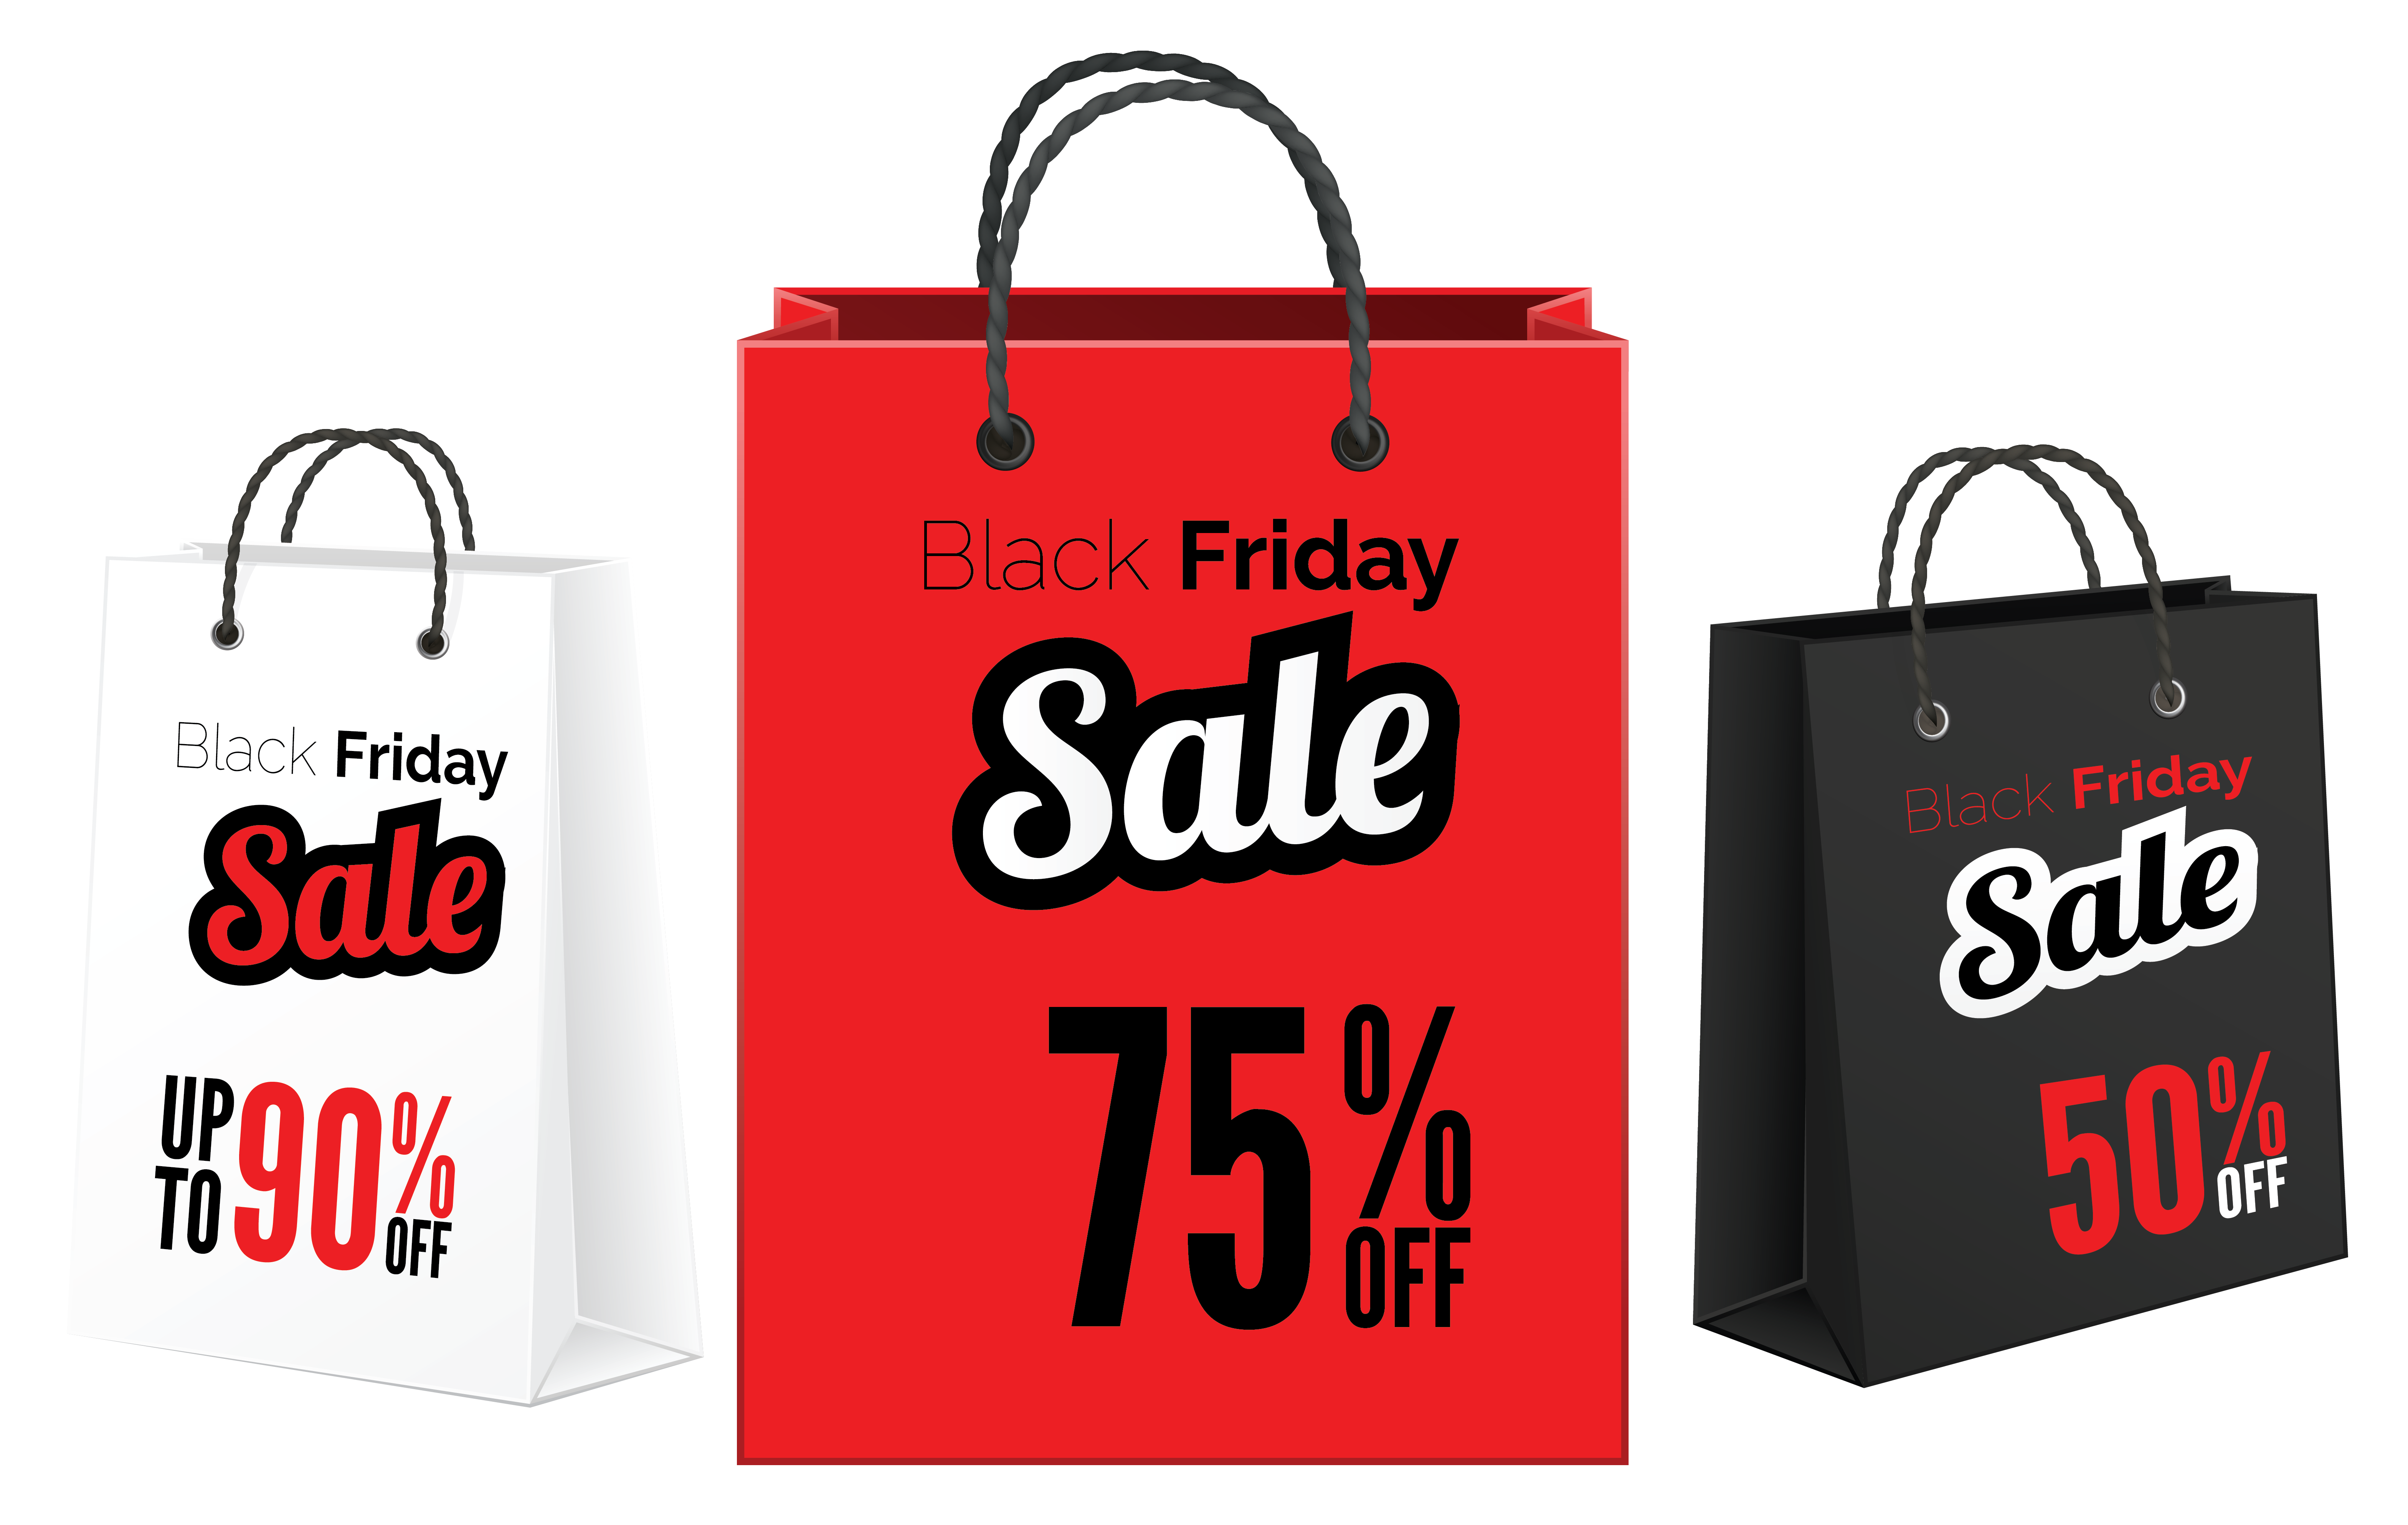 Black Friday Sale Bags PNG Clipart Image | Gallery Yopriceville - High-Quality Images and ...